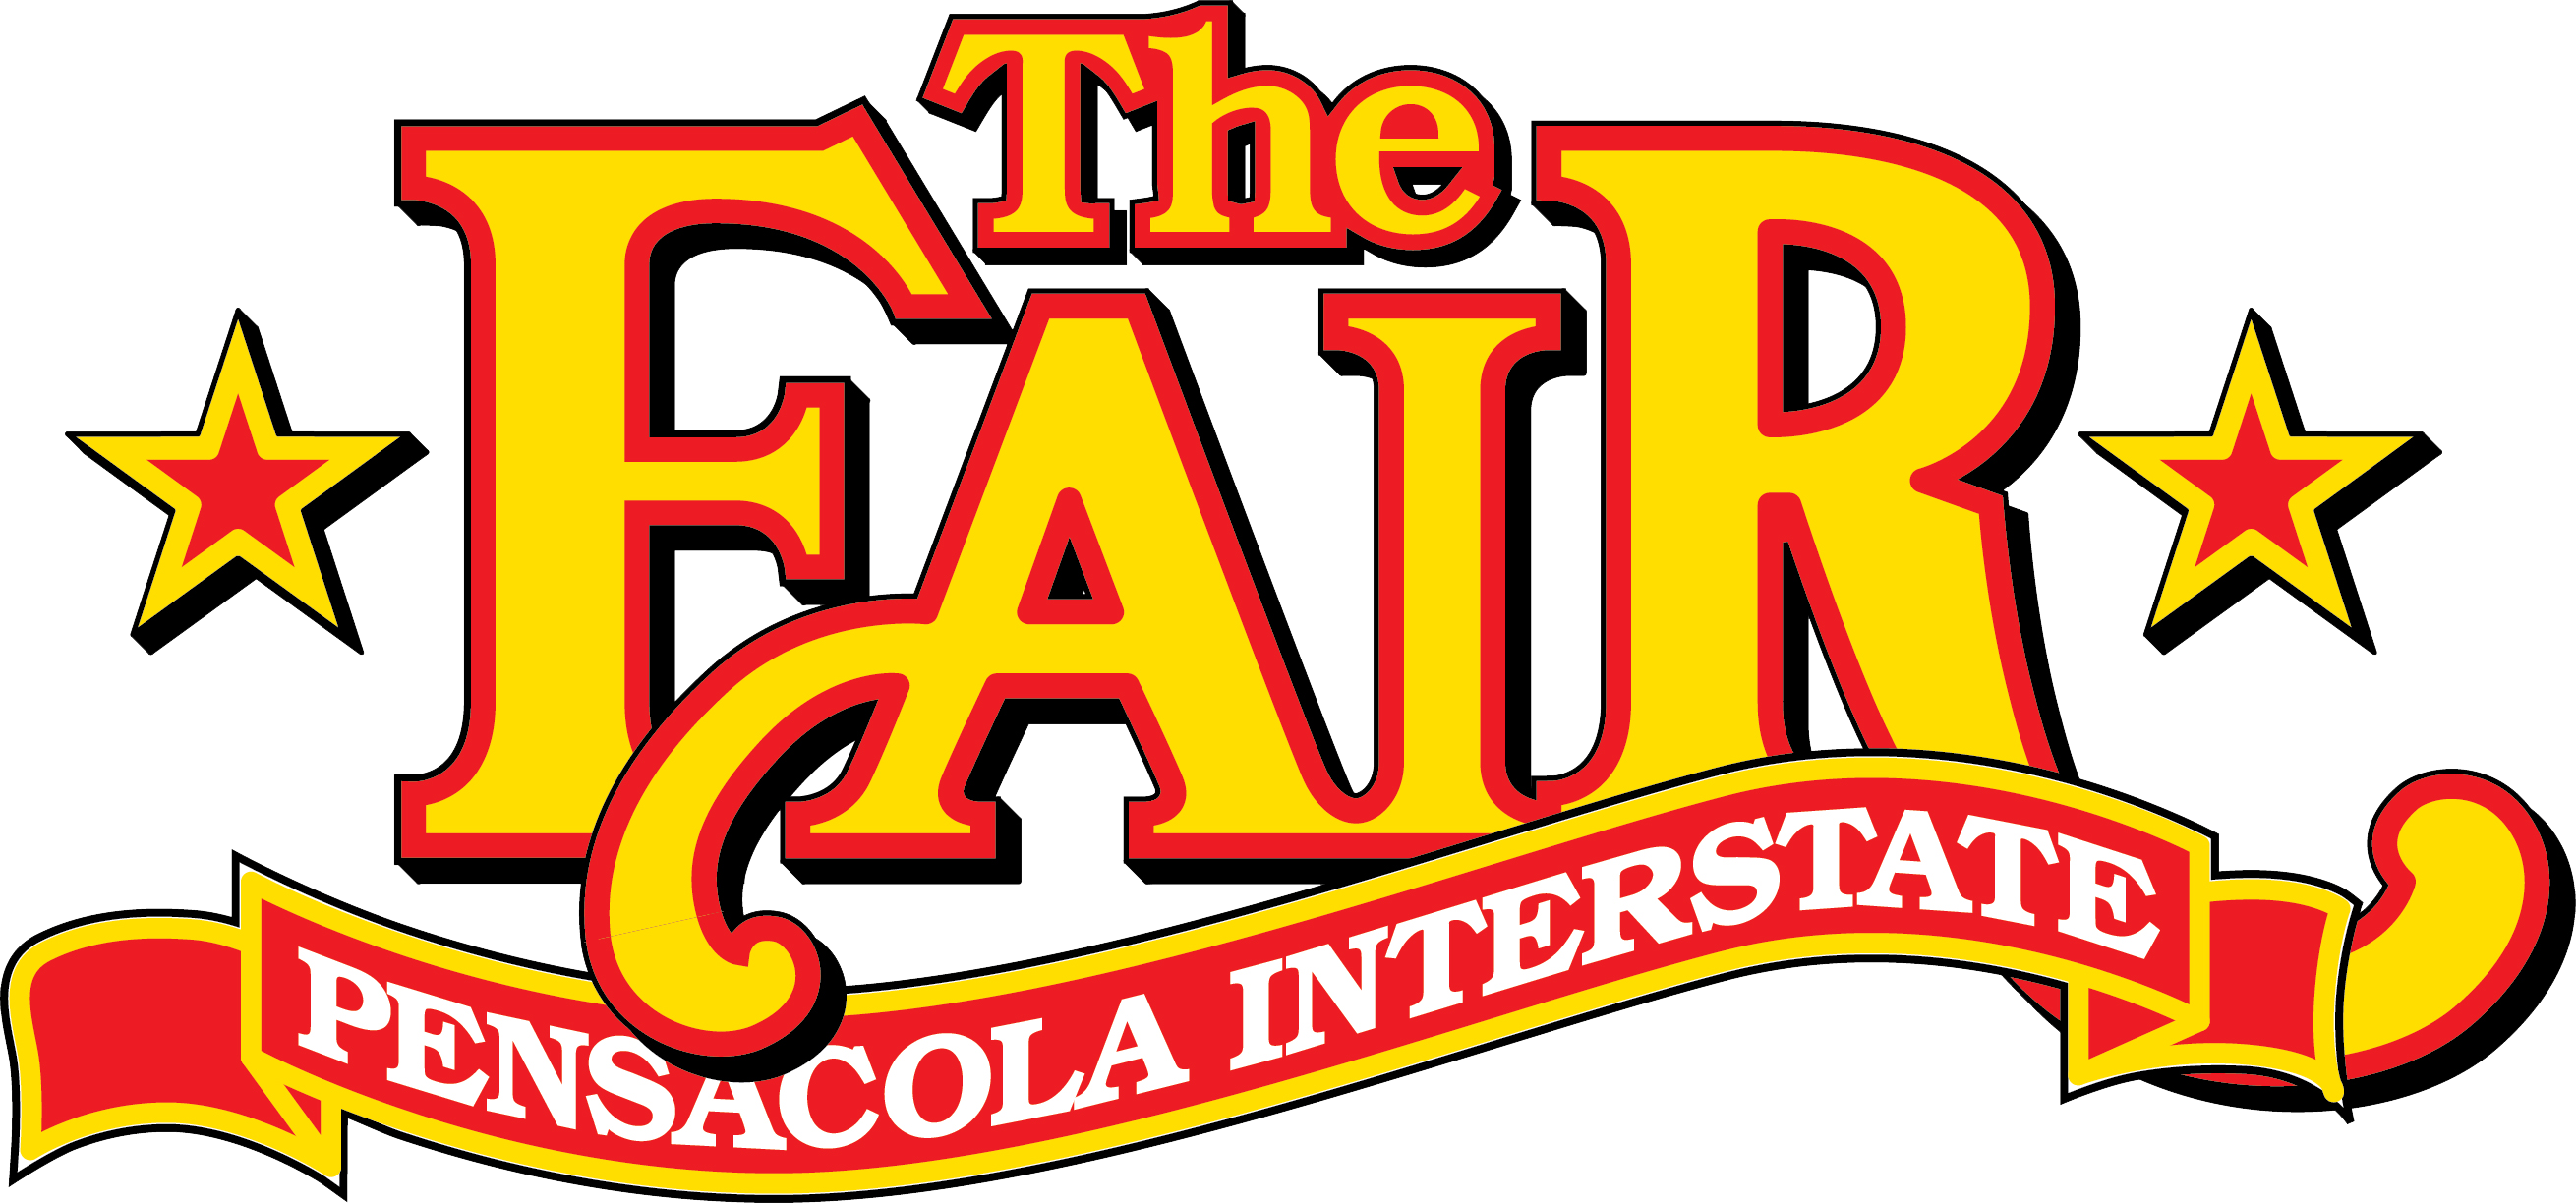 FairLogo 18 Red thick6.png